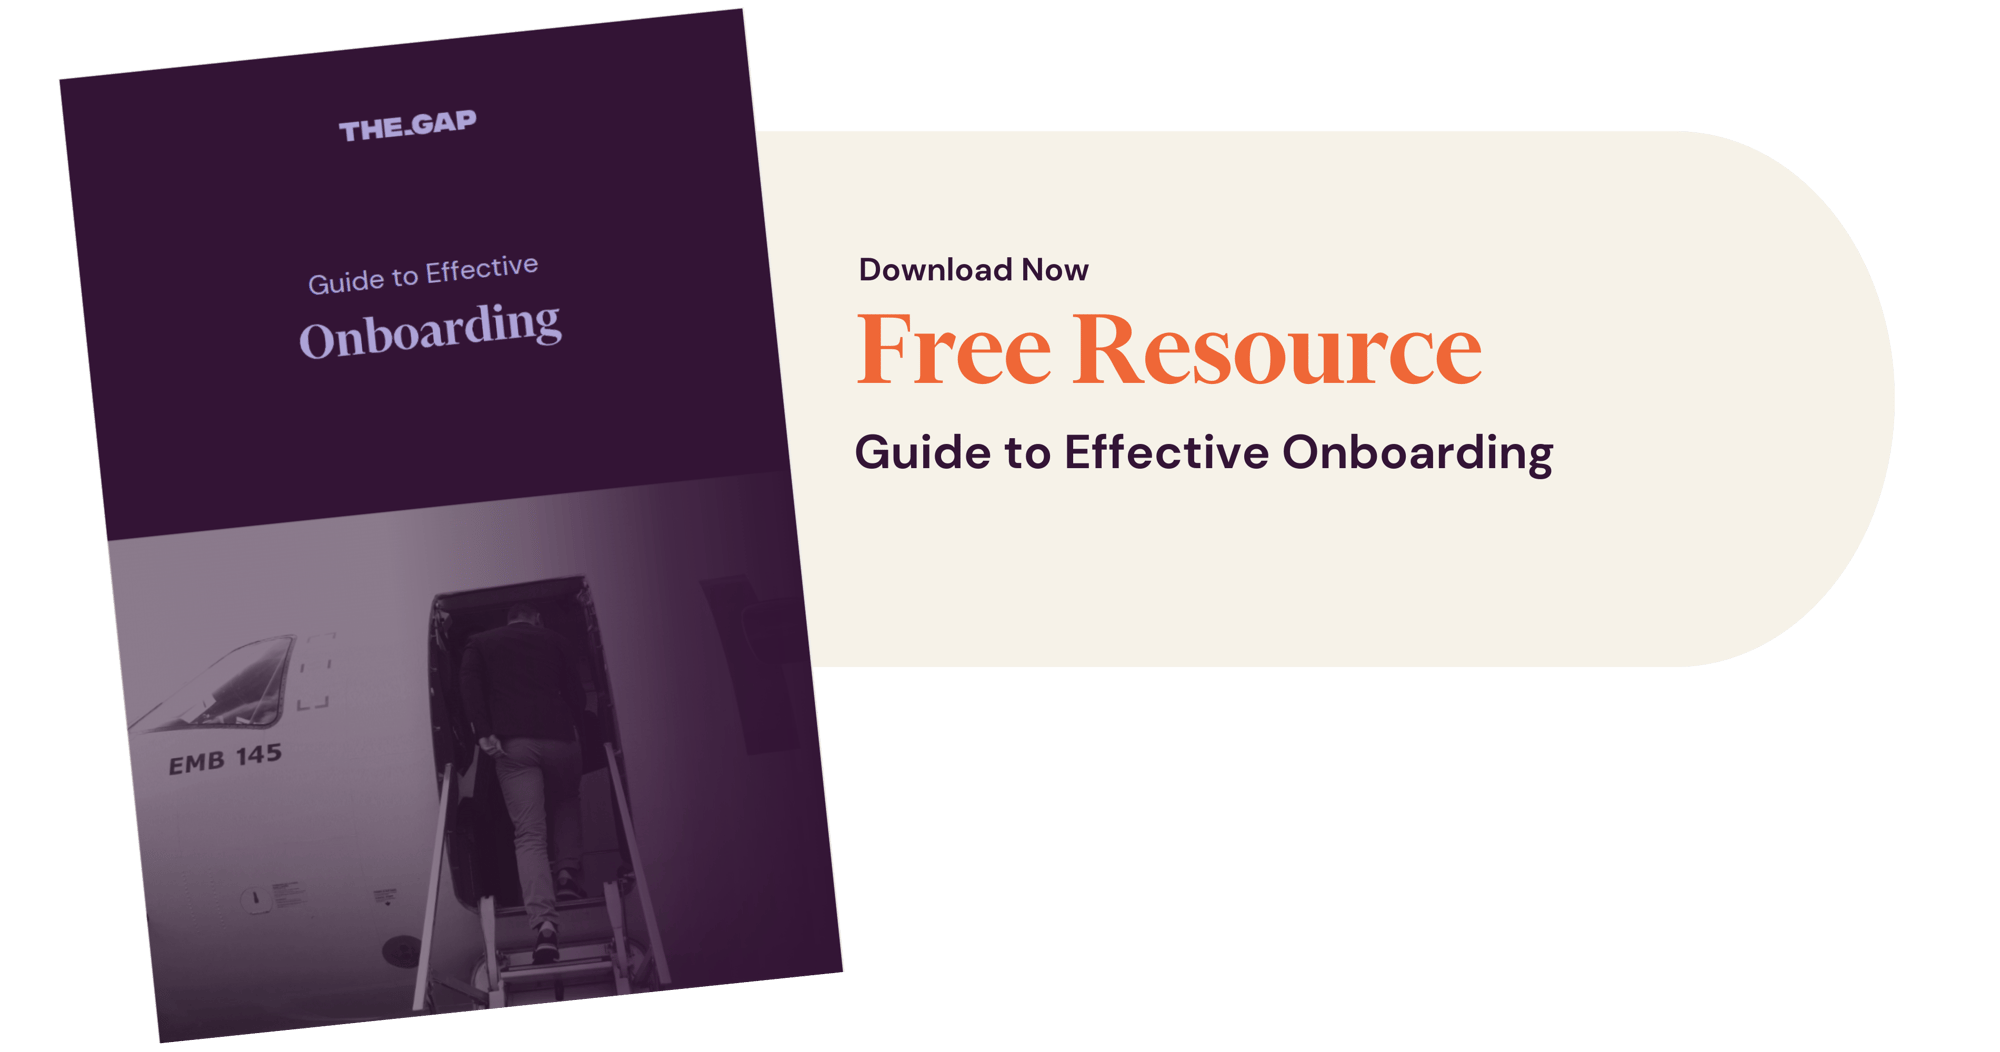 Download Banner - Guide to Effective Onboarding